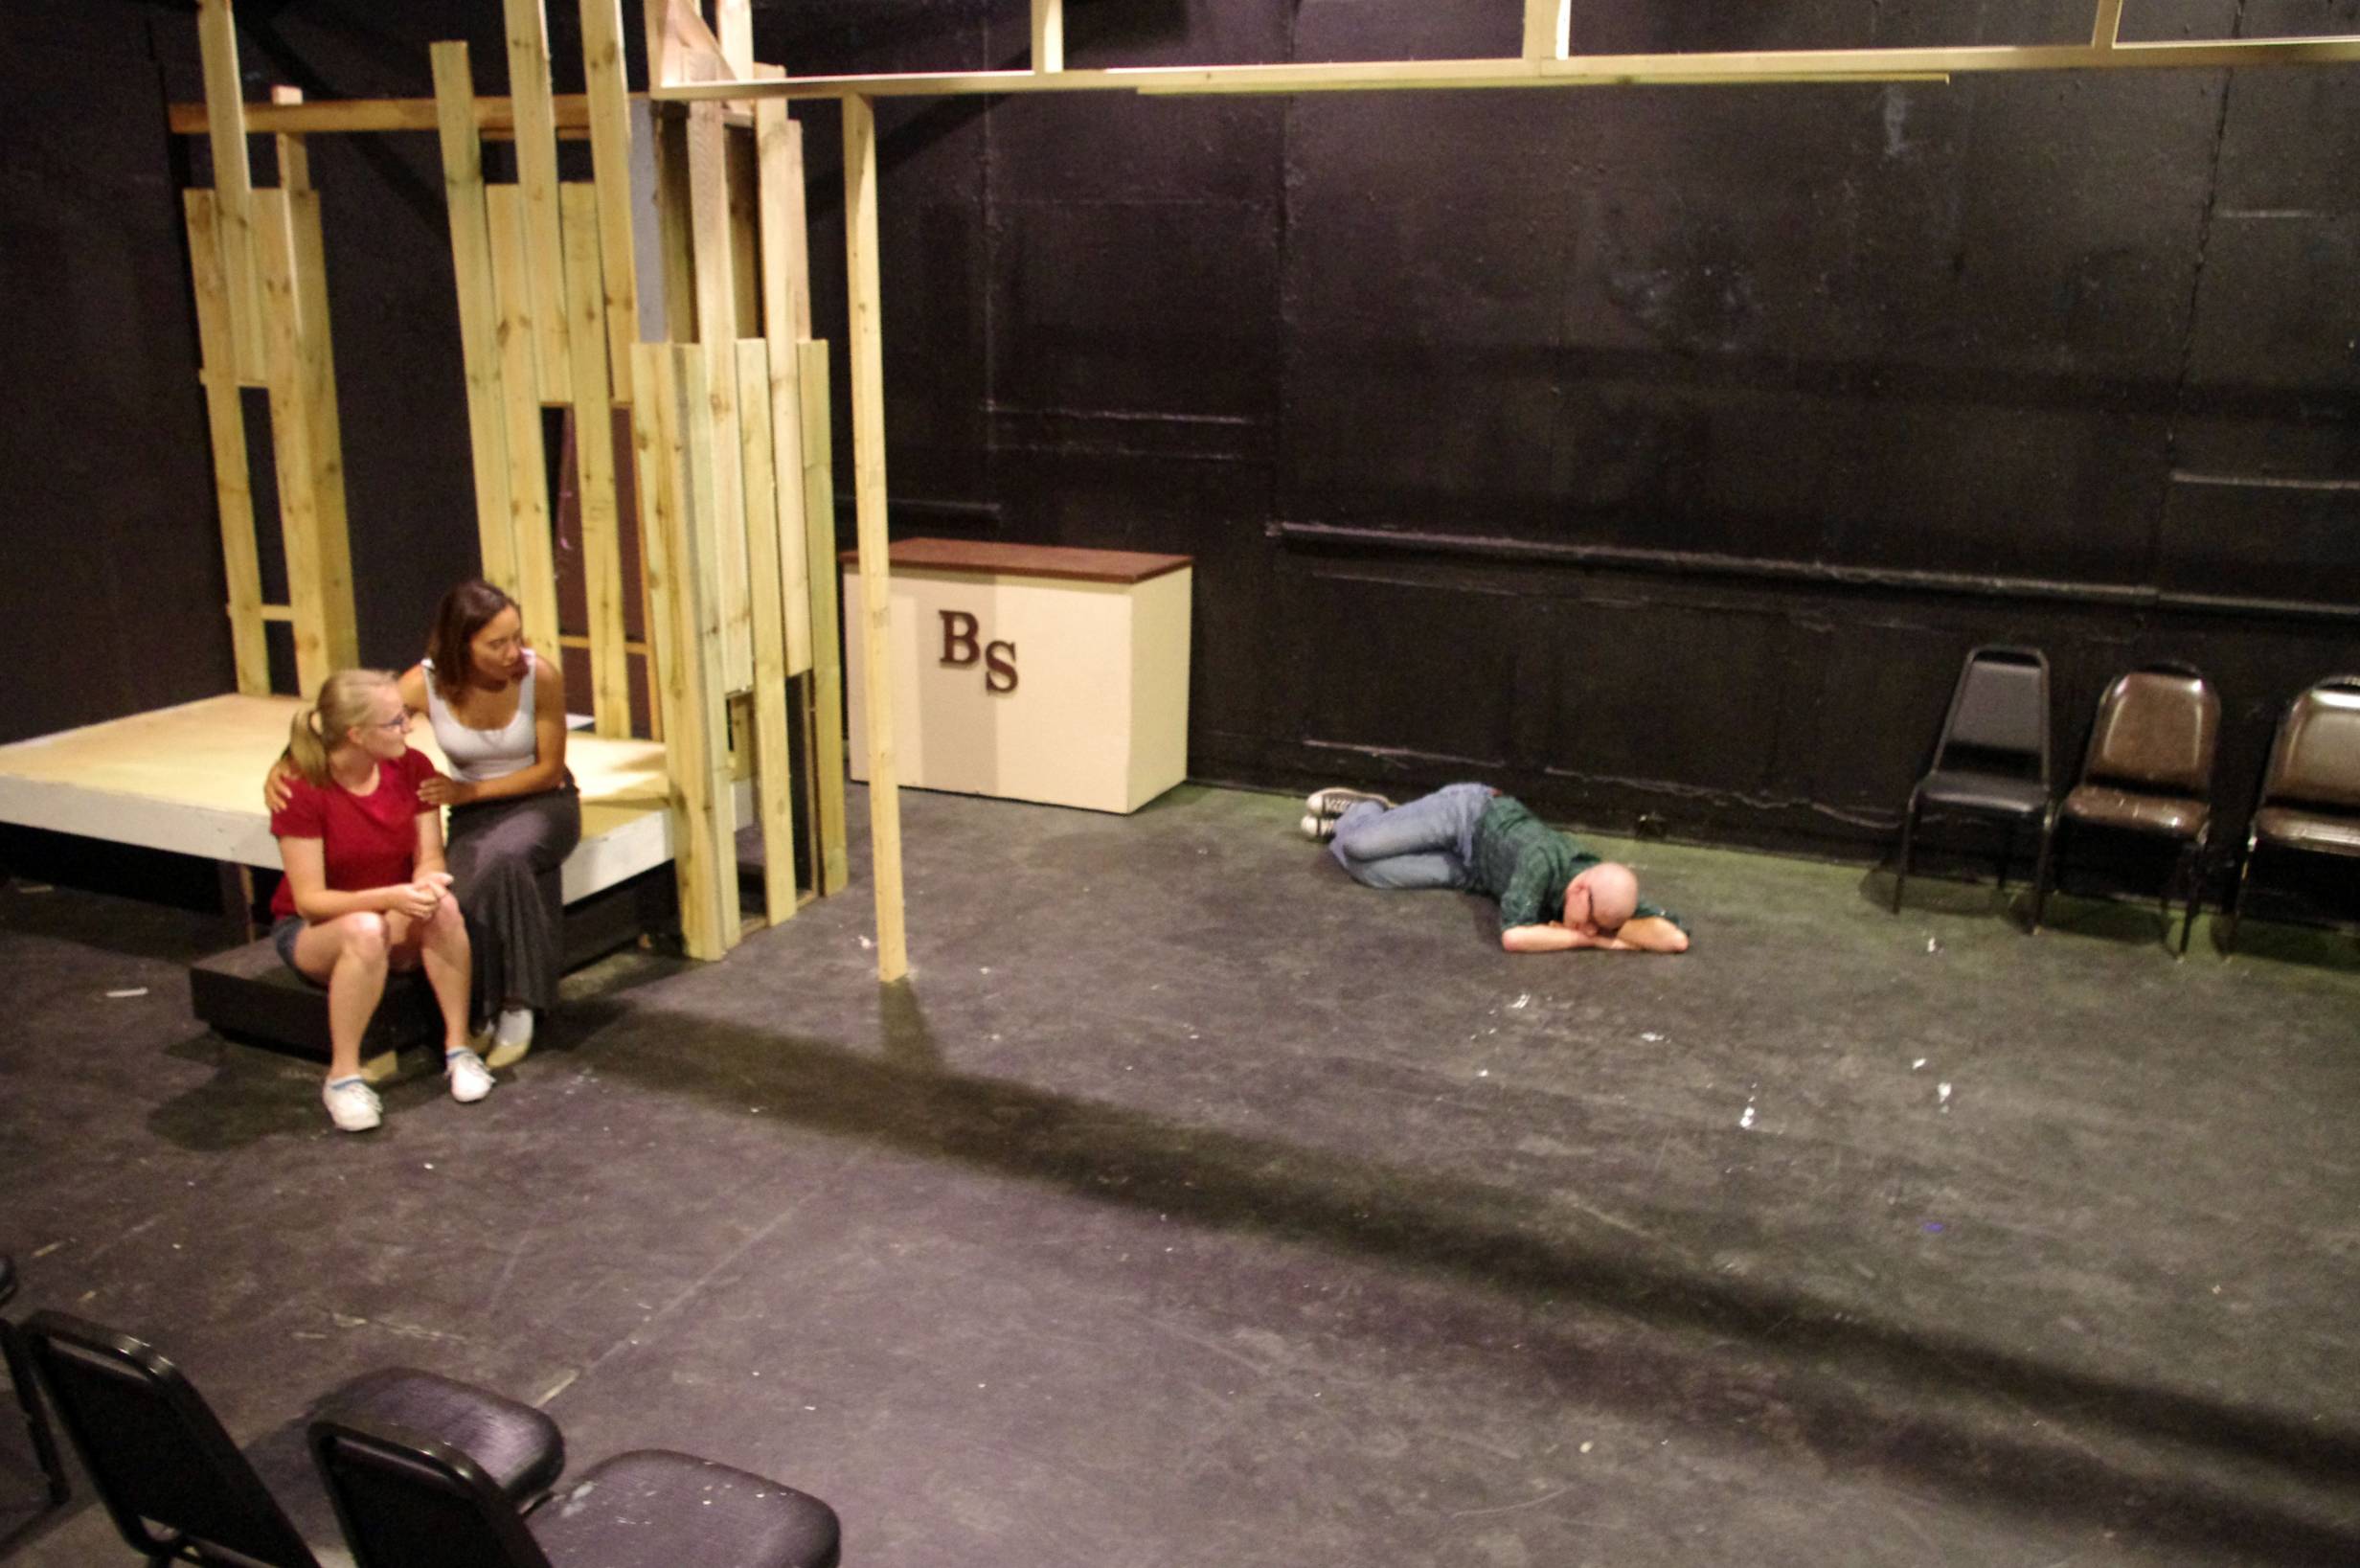 Rehearsals wrap up for Bat Boy: The Musical